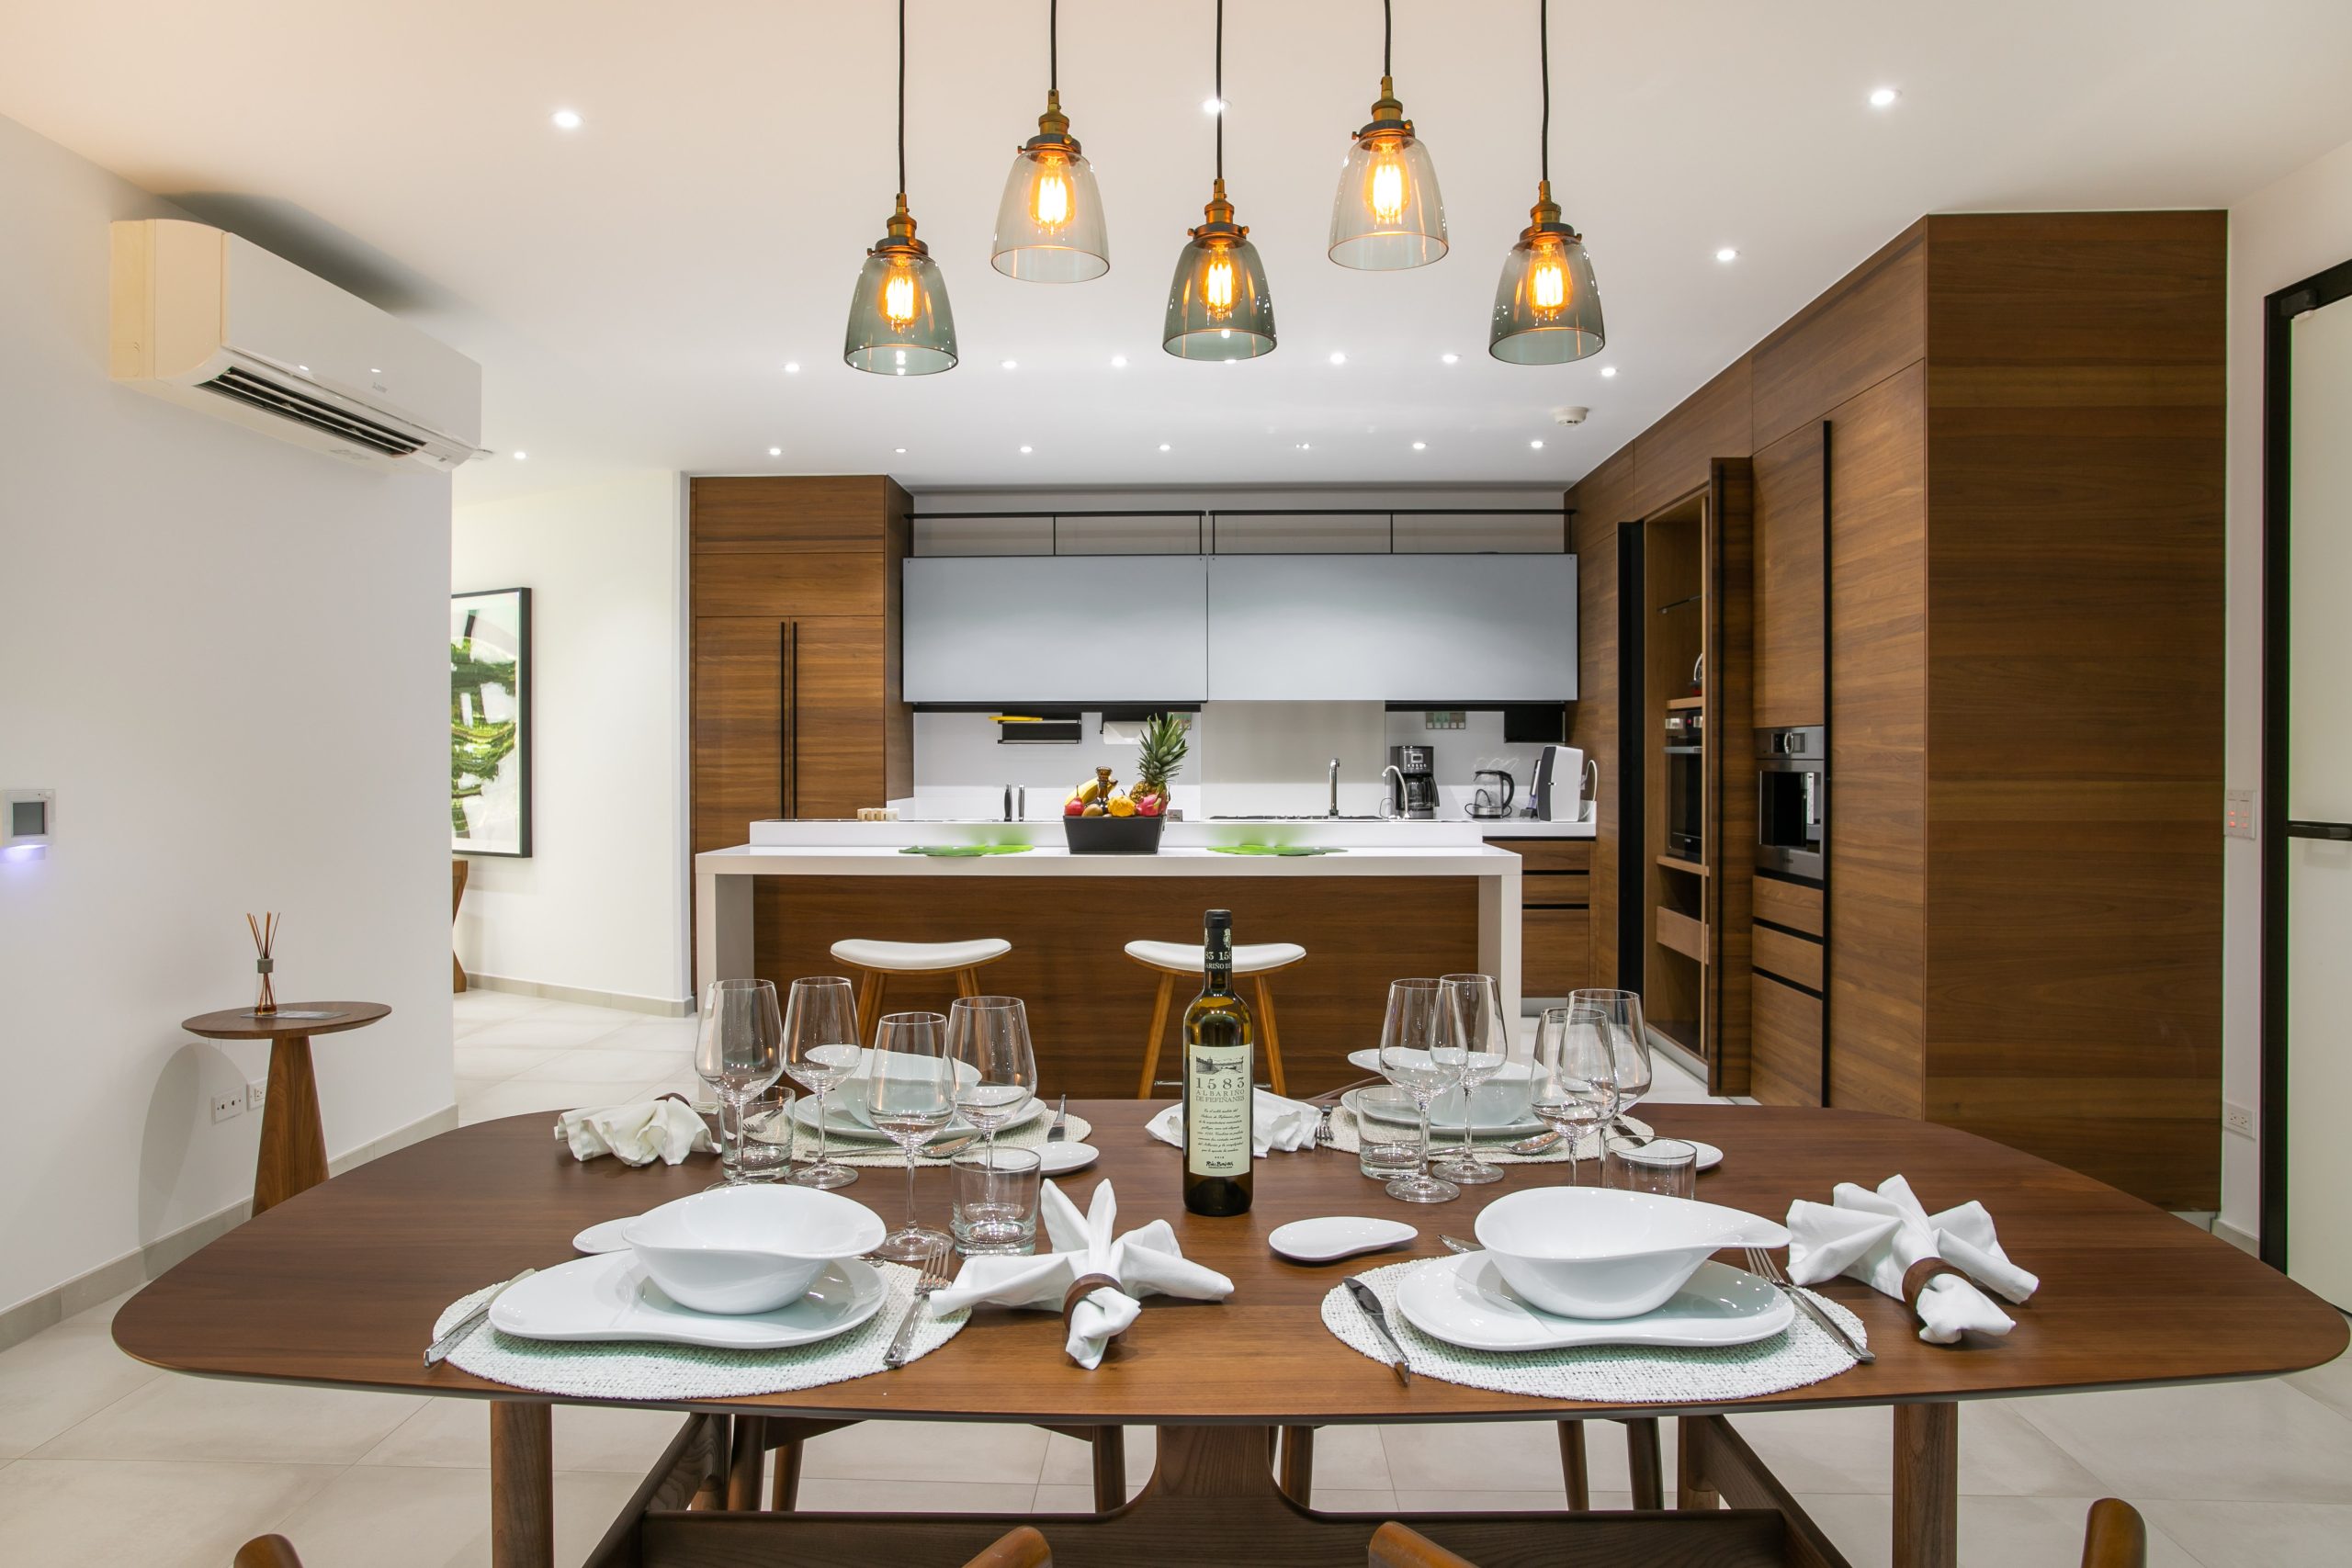 Dining in luxury with your own full kitchen